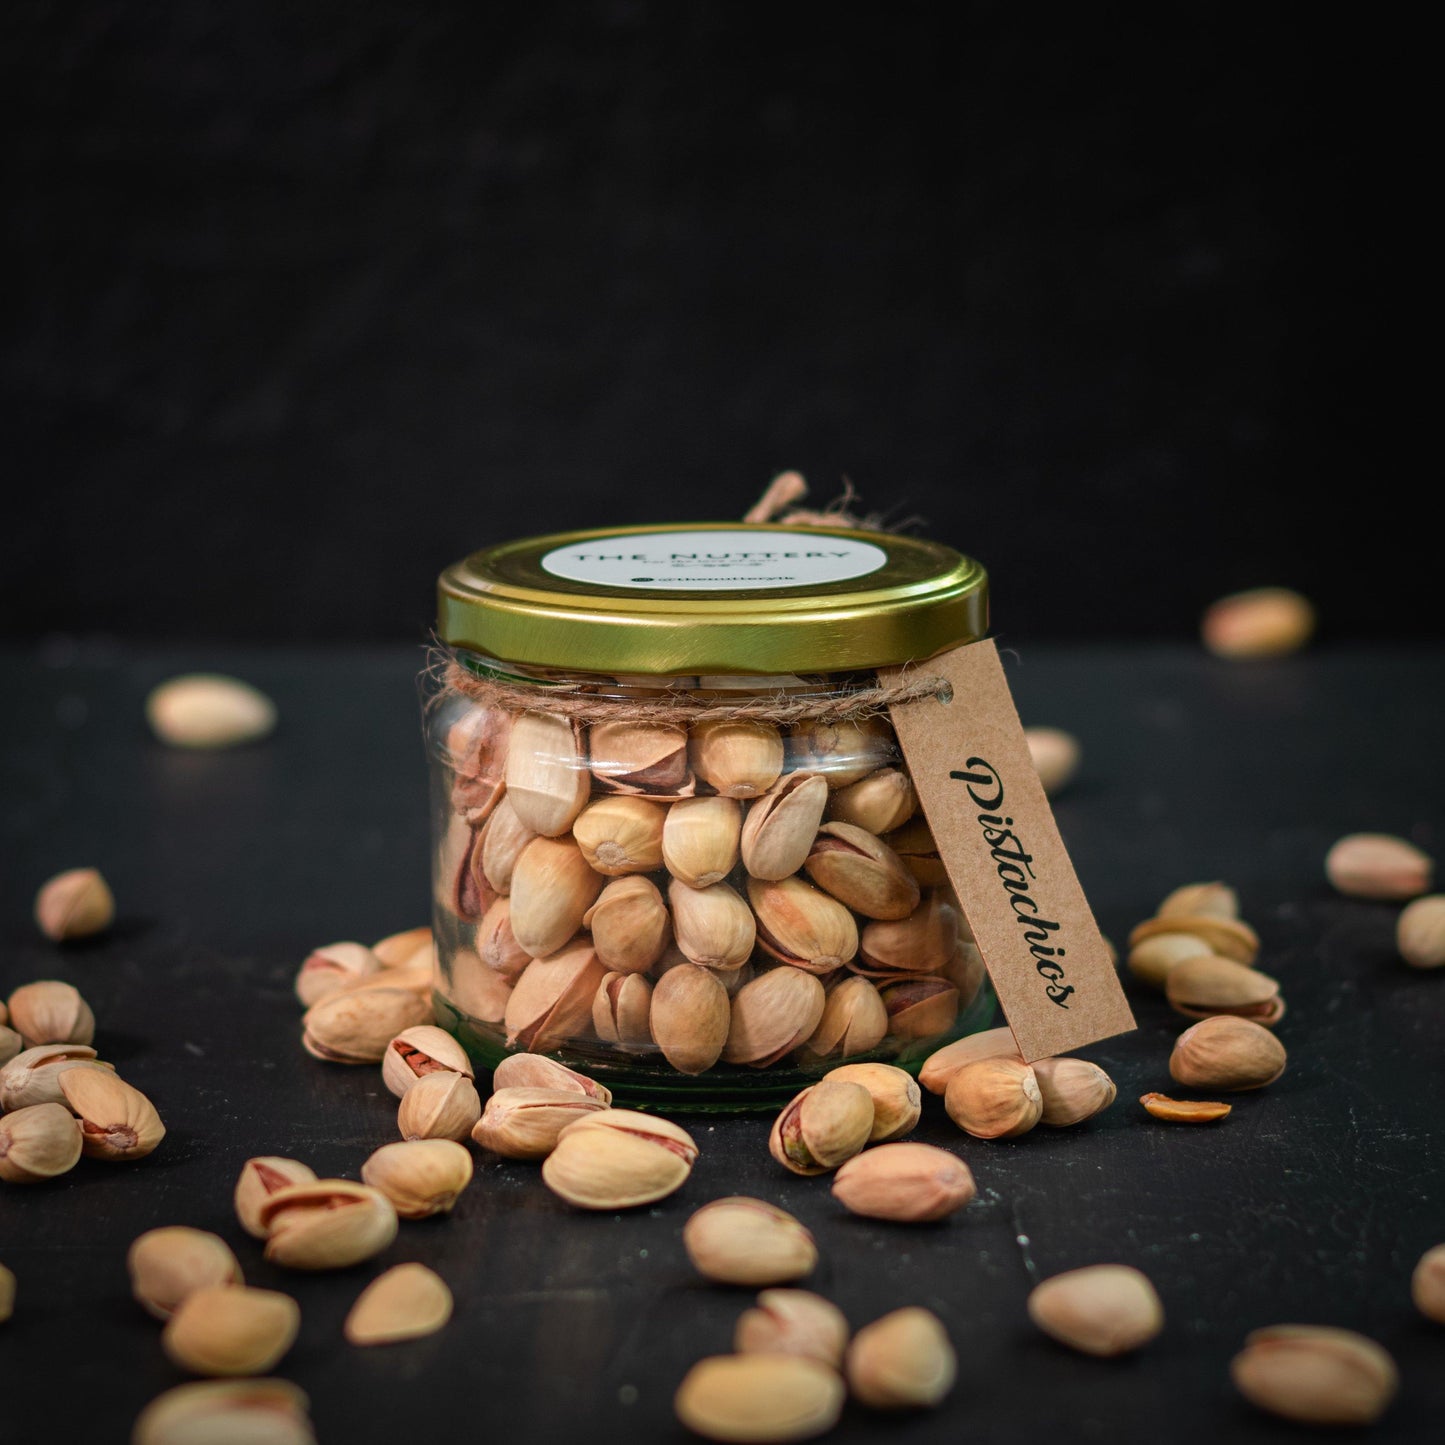 Salted Pistachios - The Nuttery